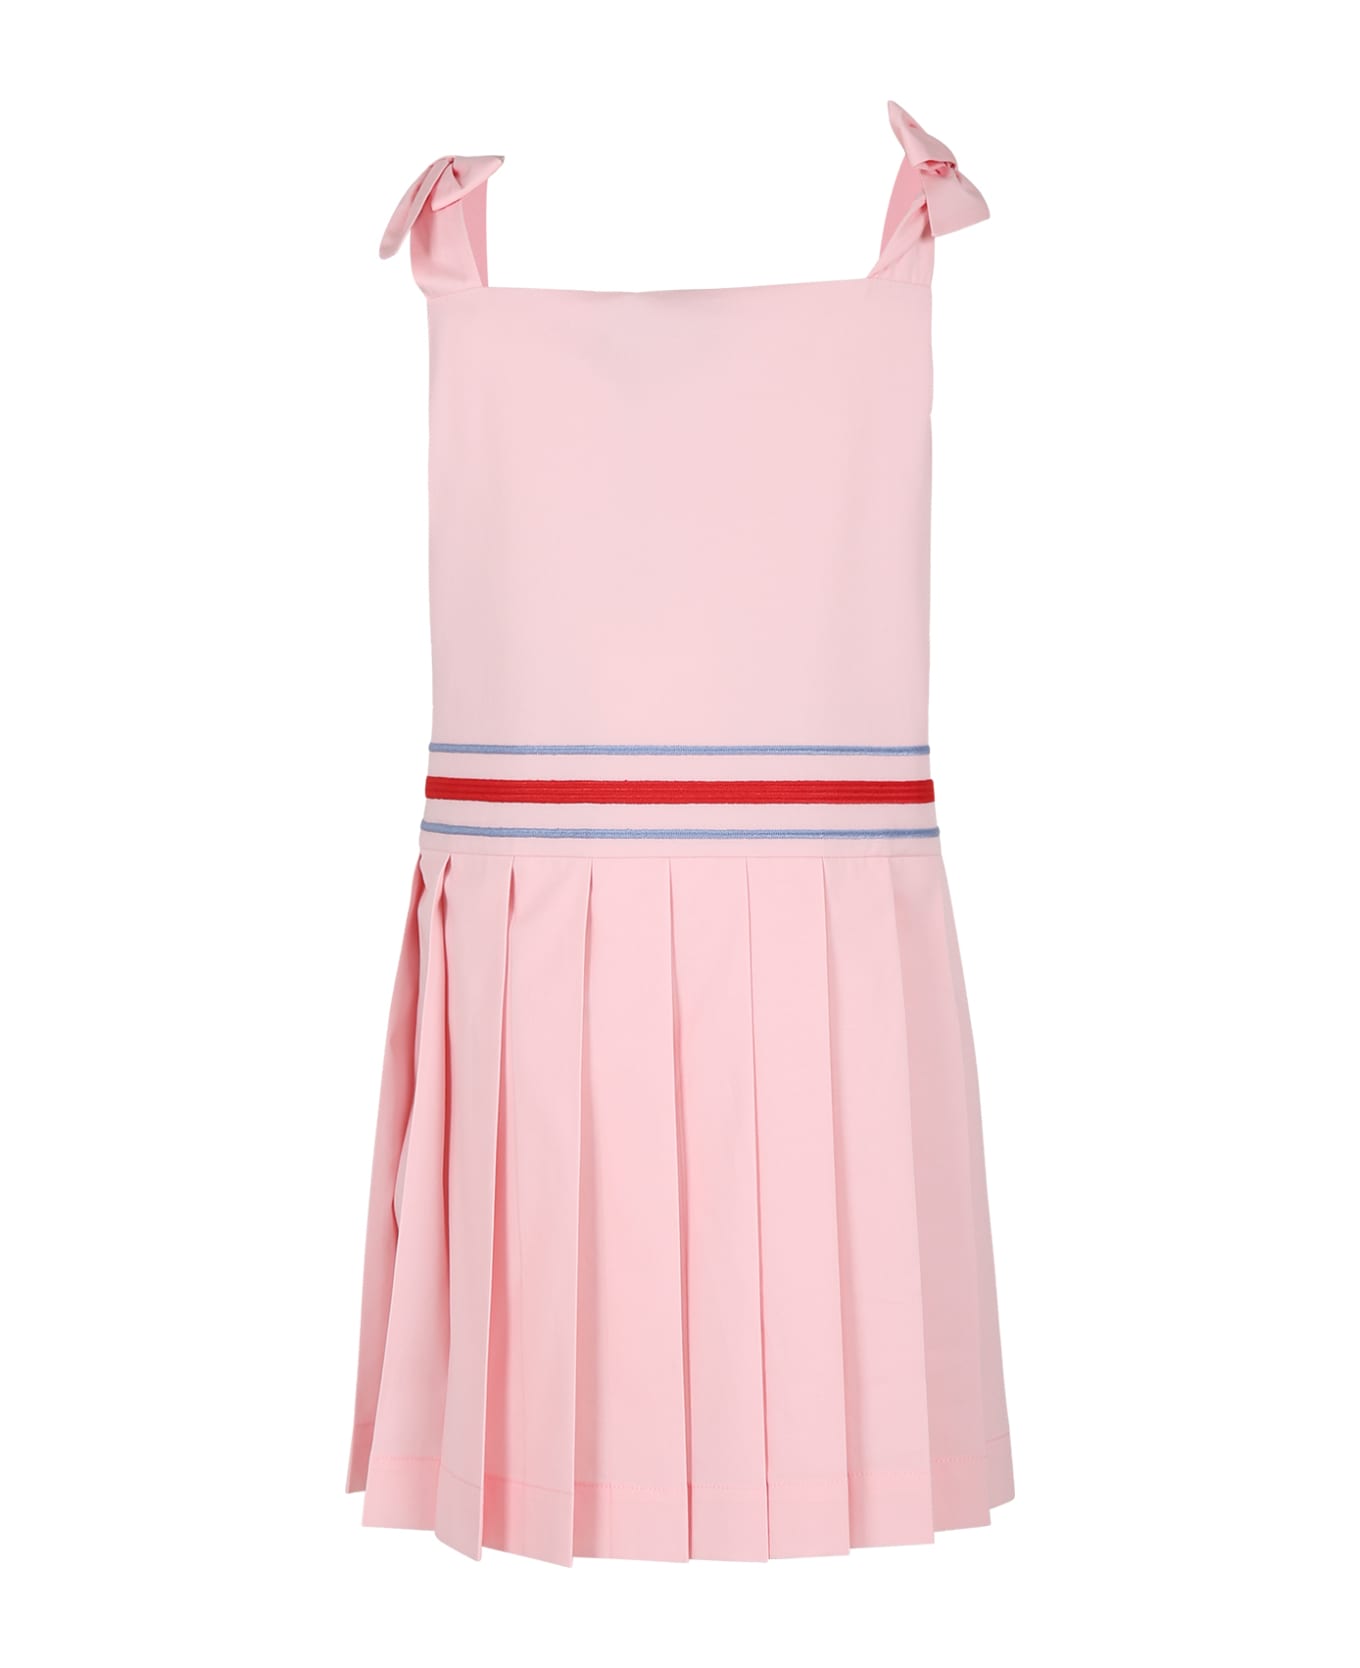 Gucci Pink Dress For Girl With Logo - Pink ワンピース＆ドレス